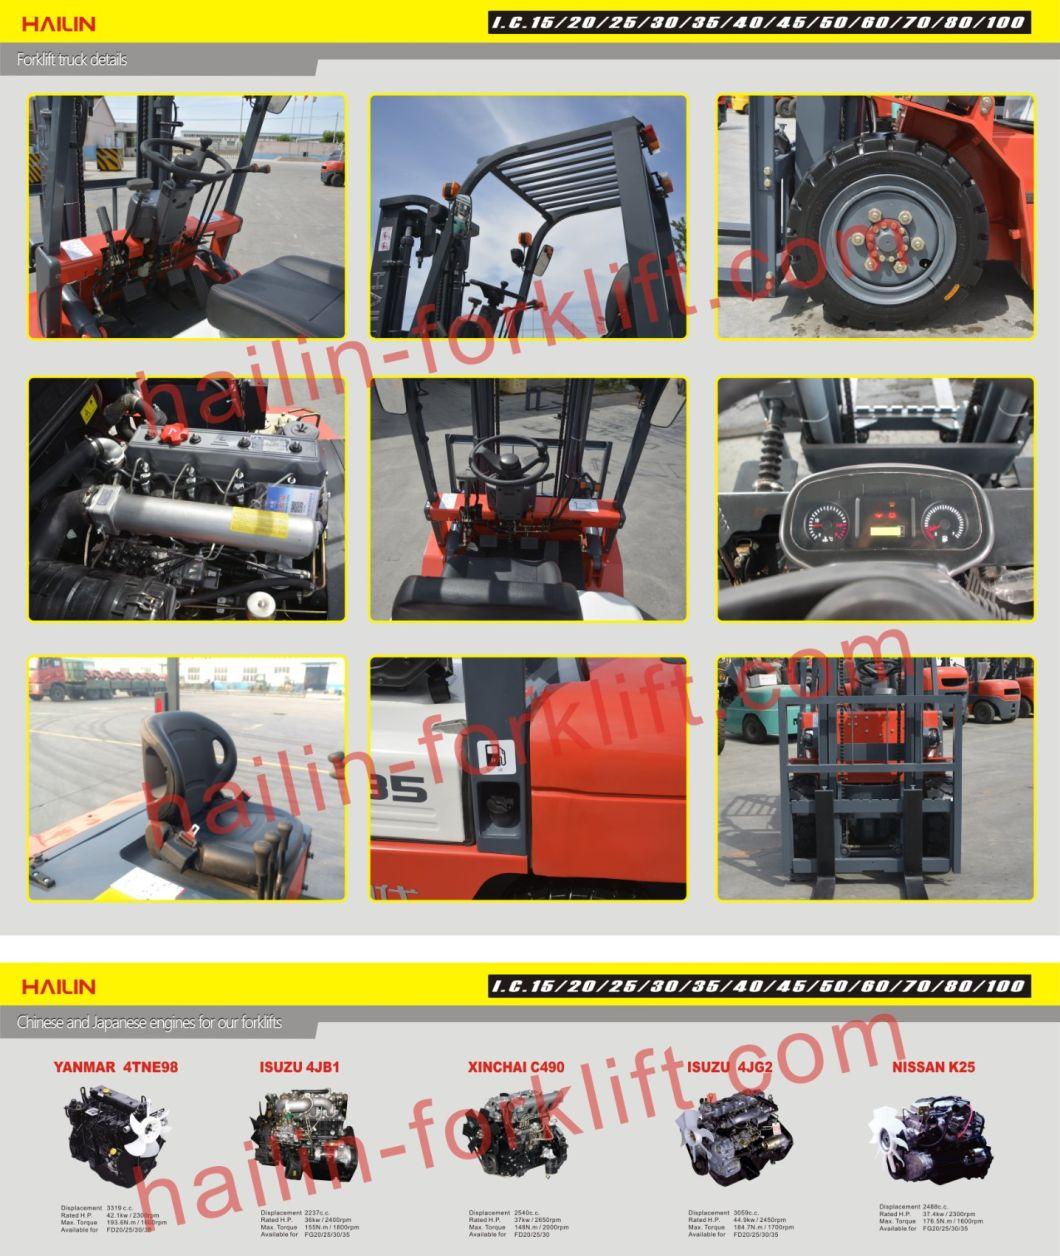 3.0 Ton 2X4 2WD All Rough Terrain Forklift Truck off Road Forklift CE Certificate Euro 5 Epastandard Configuration: Chinese Xinchai Diesel Engineor Japan Die